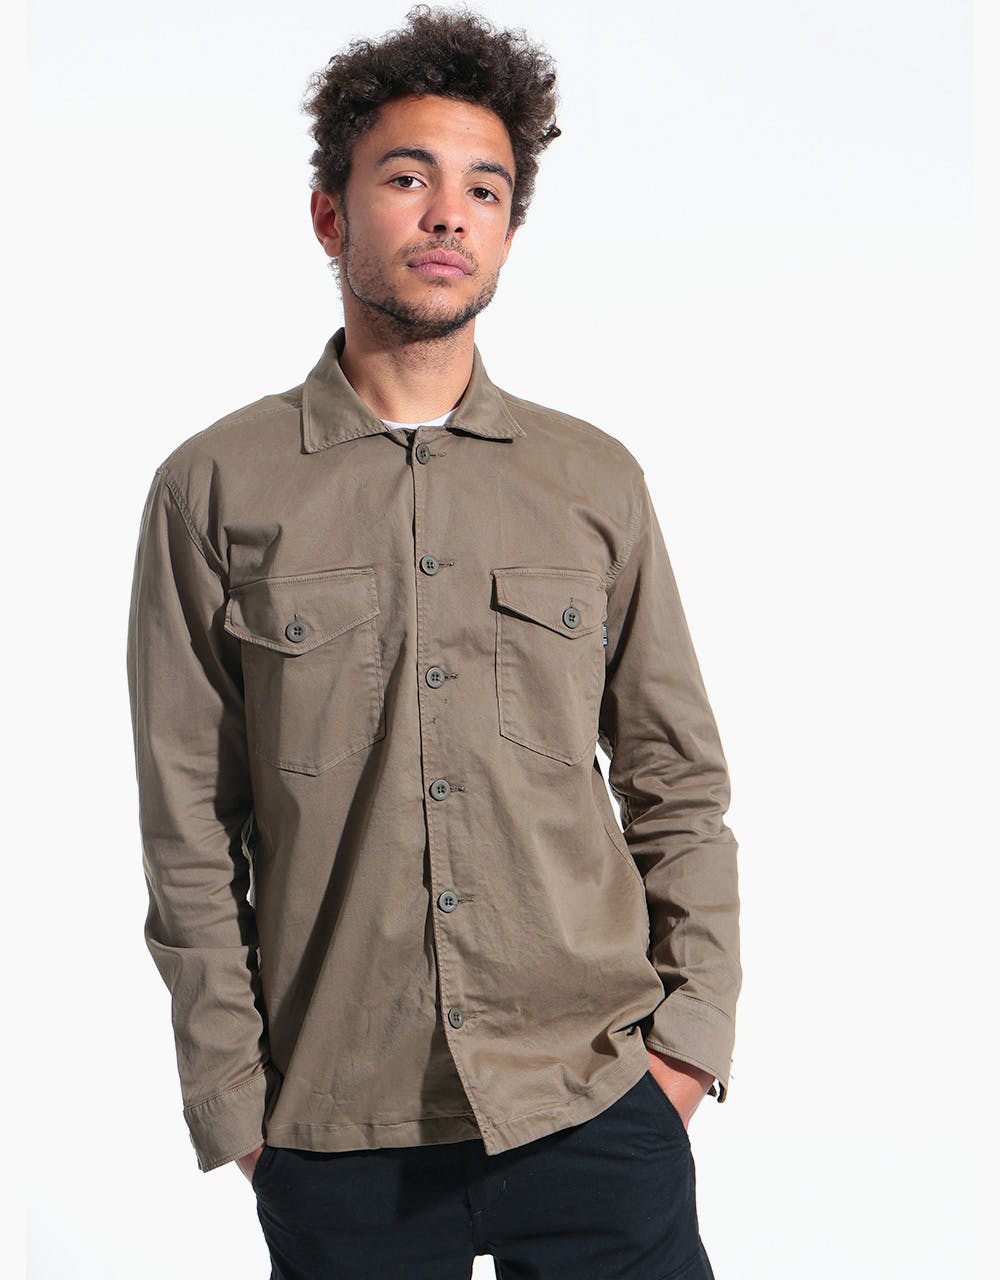 Route One Military Shirt - Olive